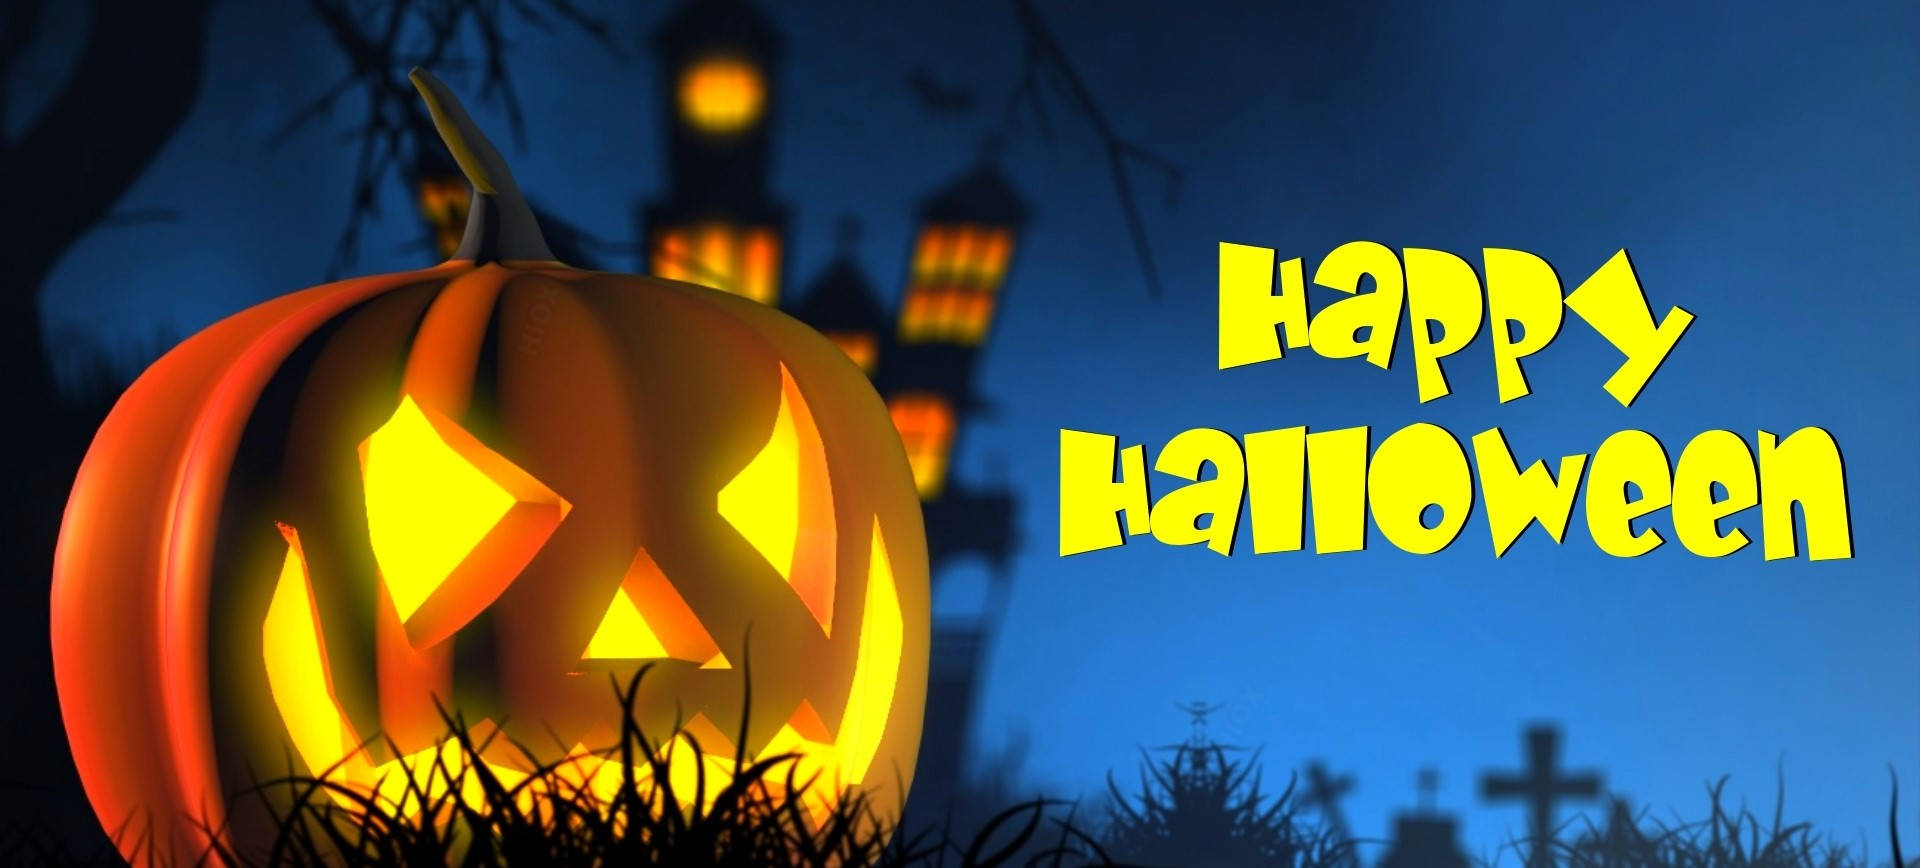 Have A Happy And Safe Halloween! Background